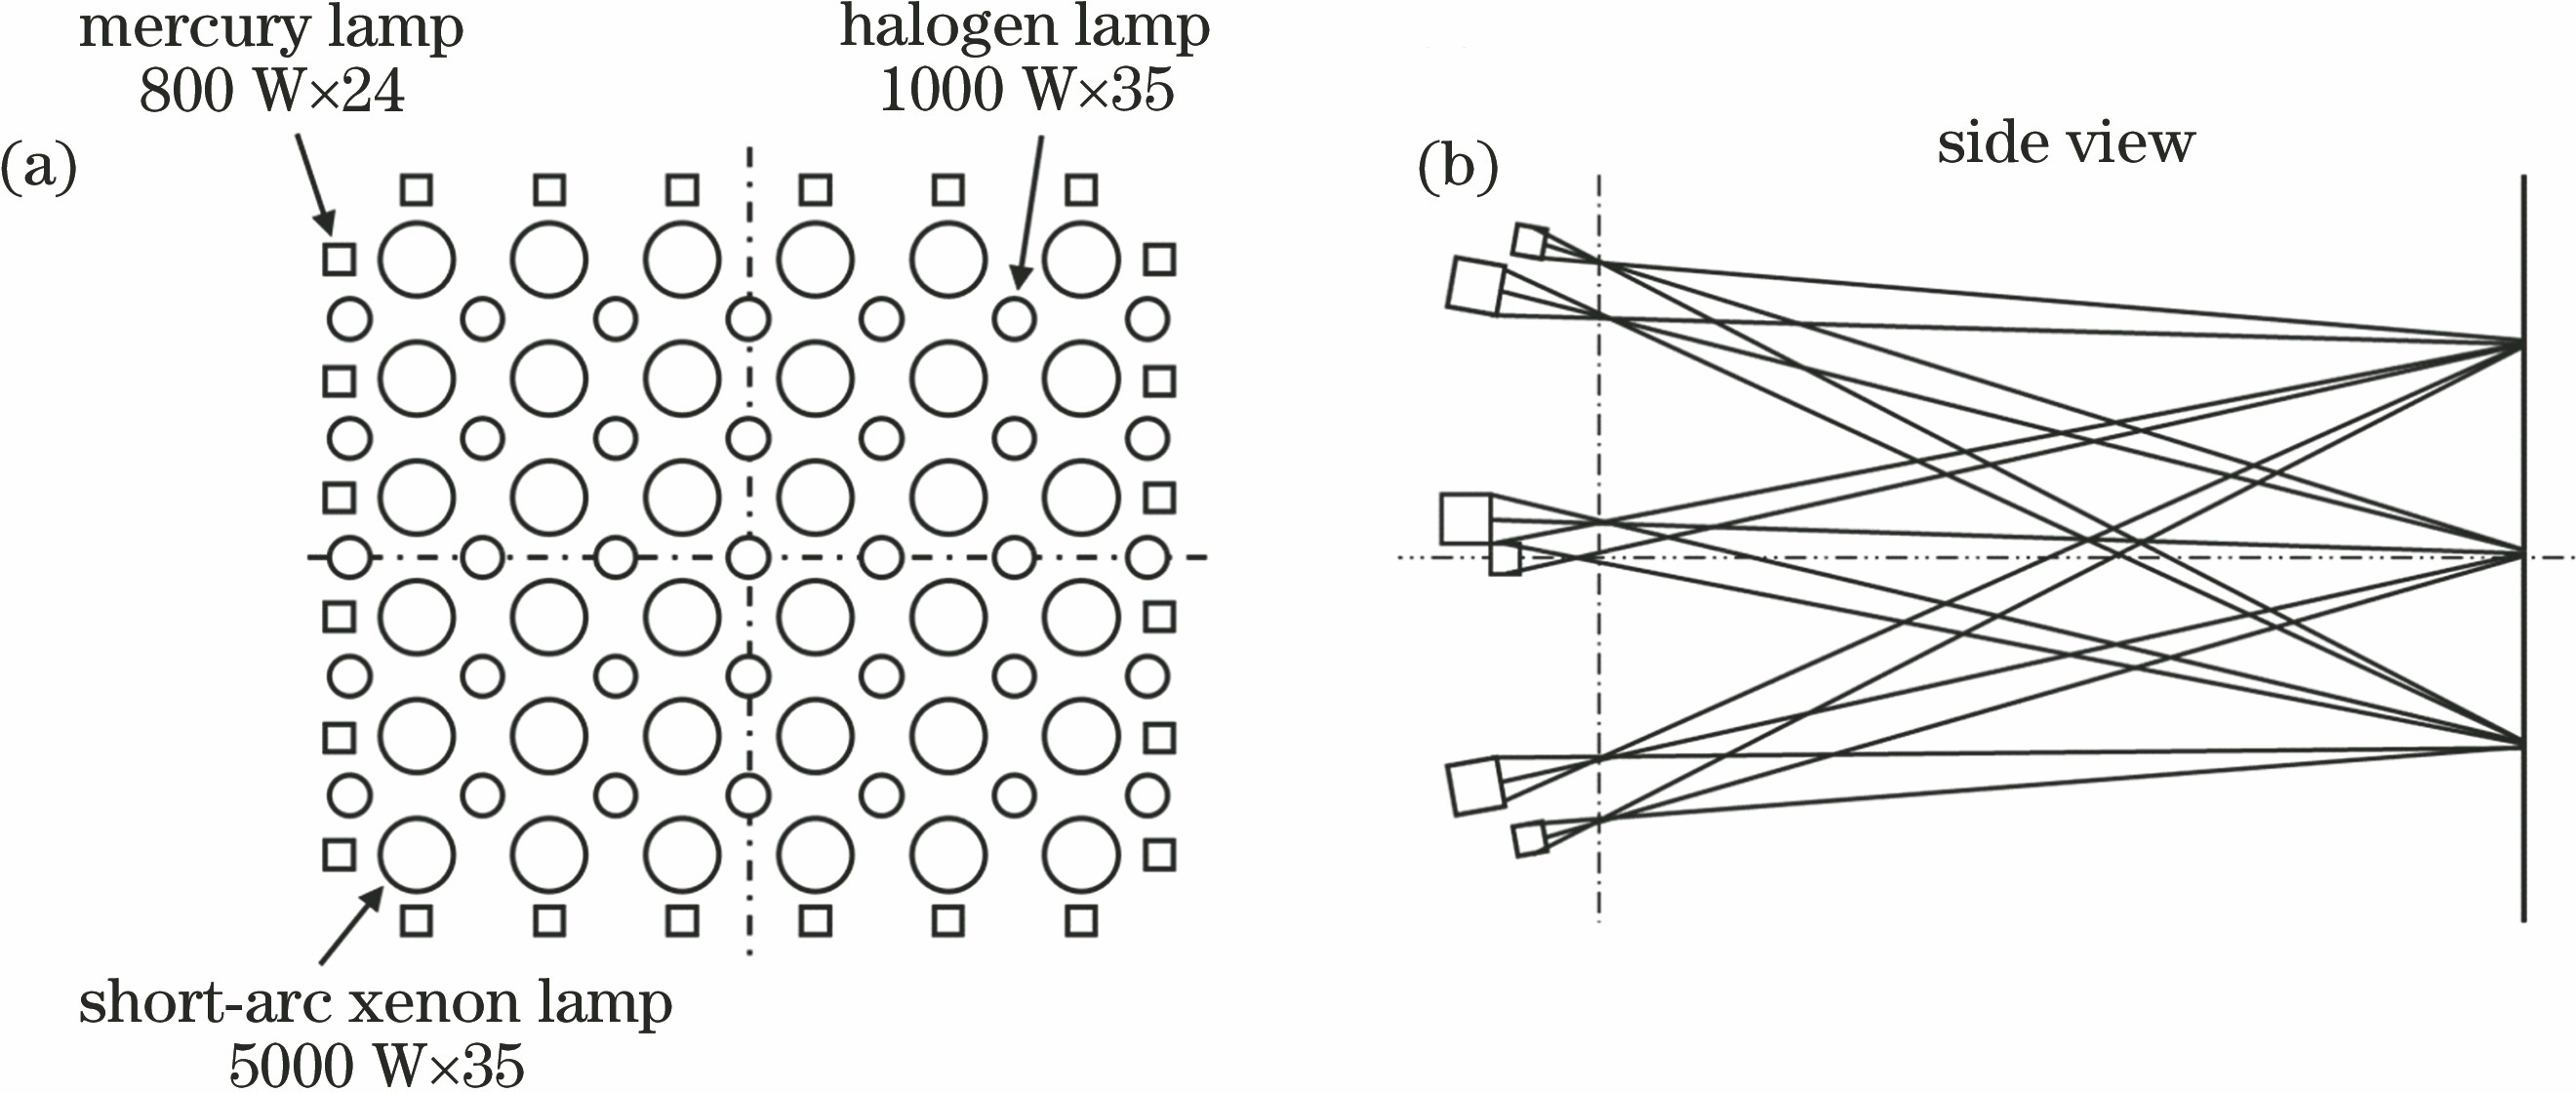 Example of crossover optical structural model. (a) Lamp array; (b) side view